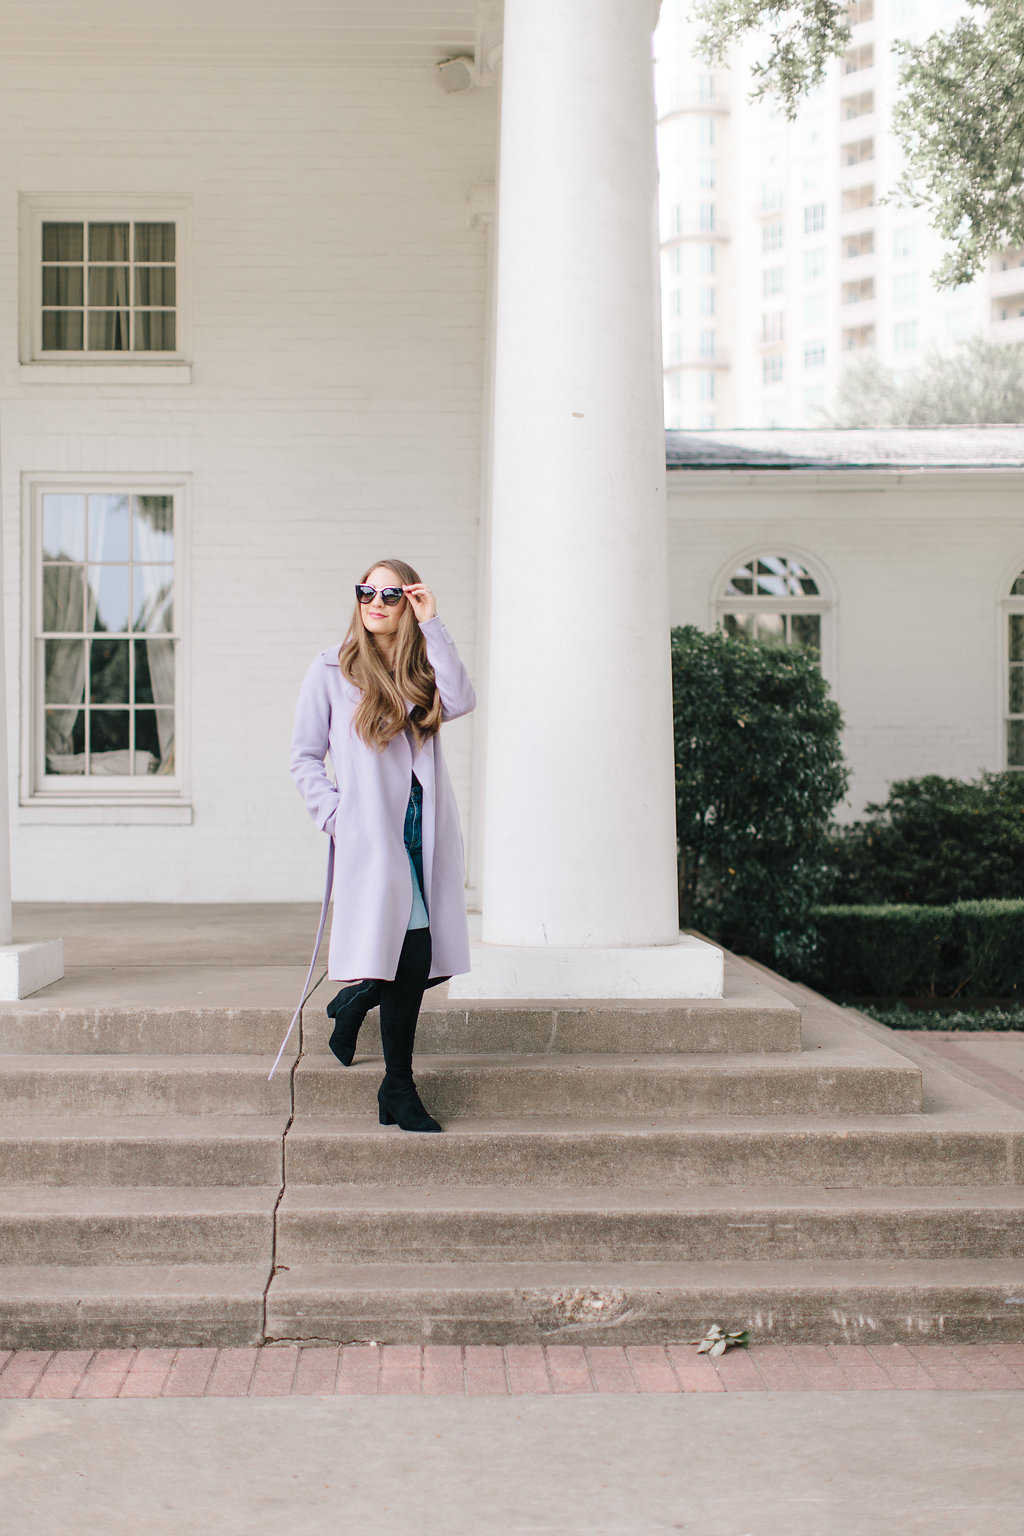 Wool trench coat and over the knee boots | Miss Madeline Rose